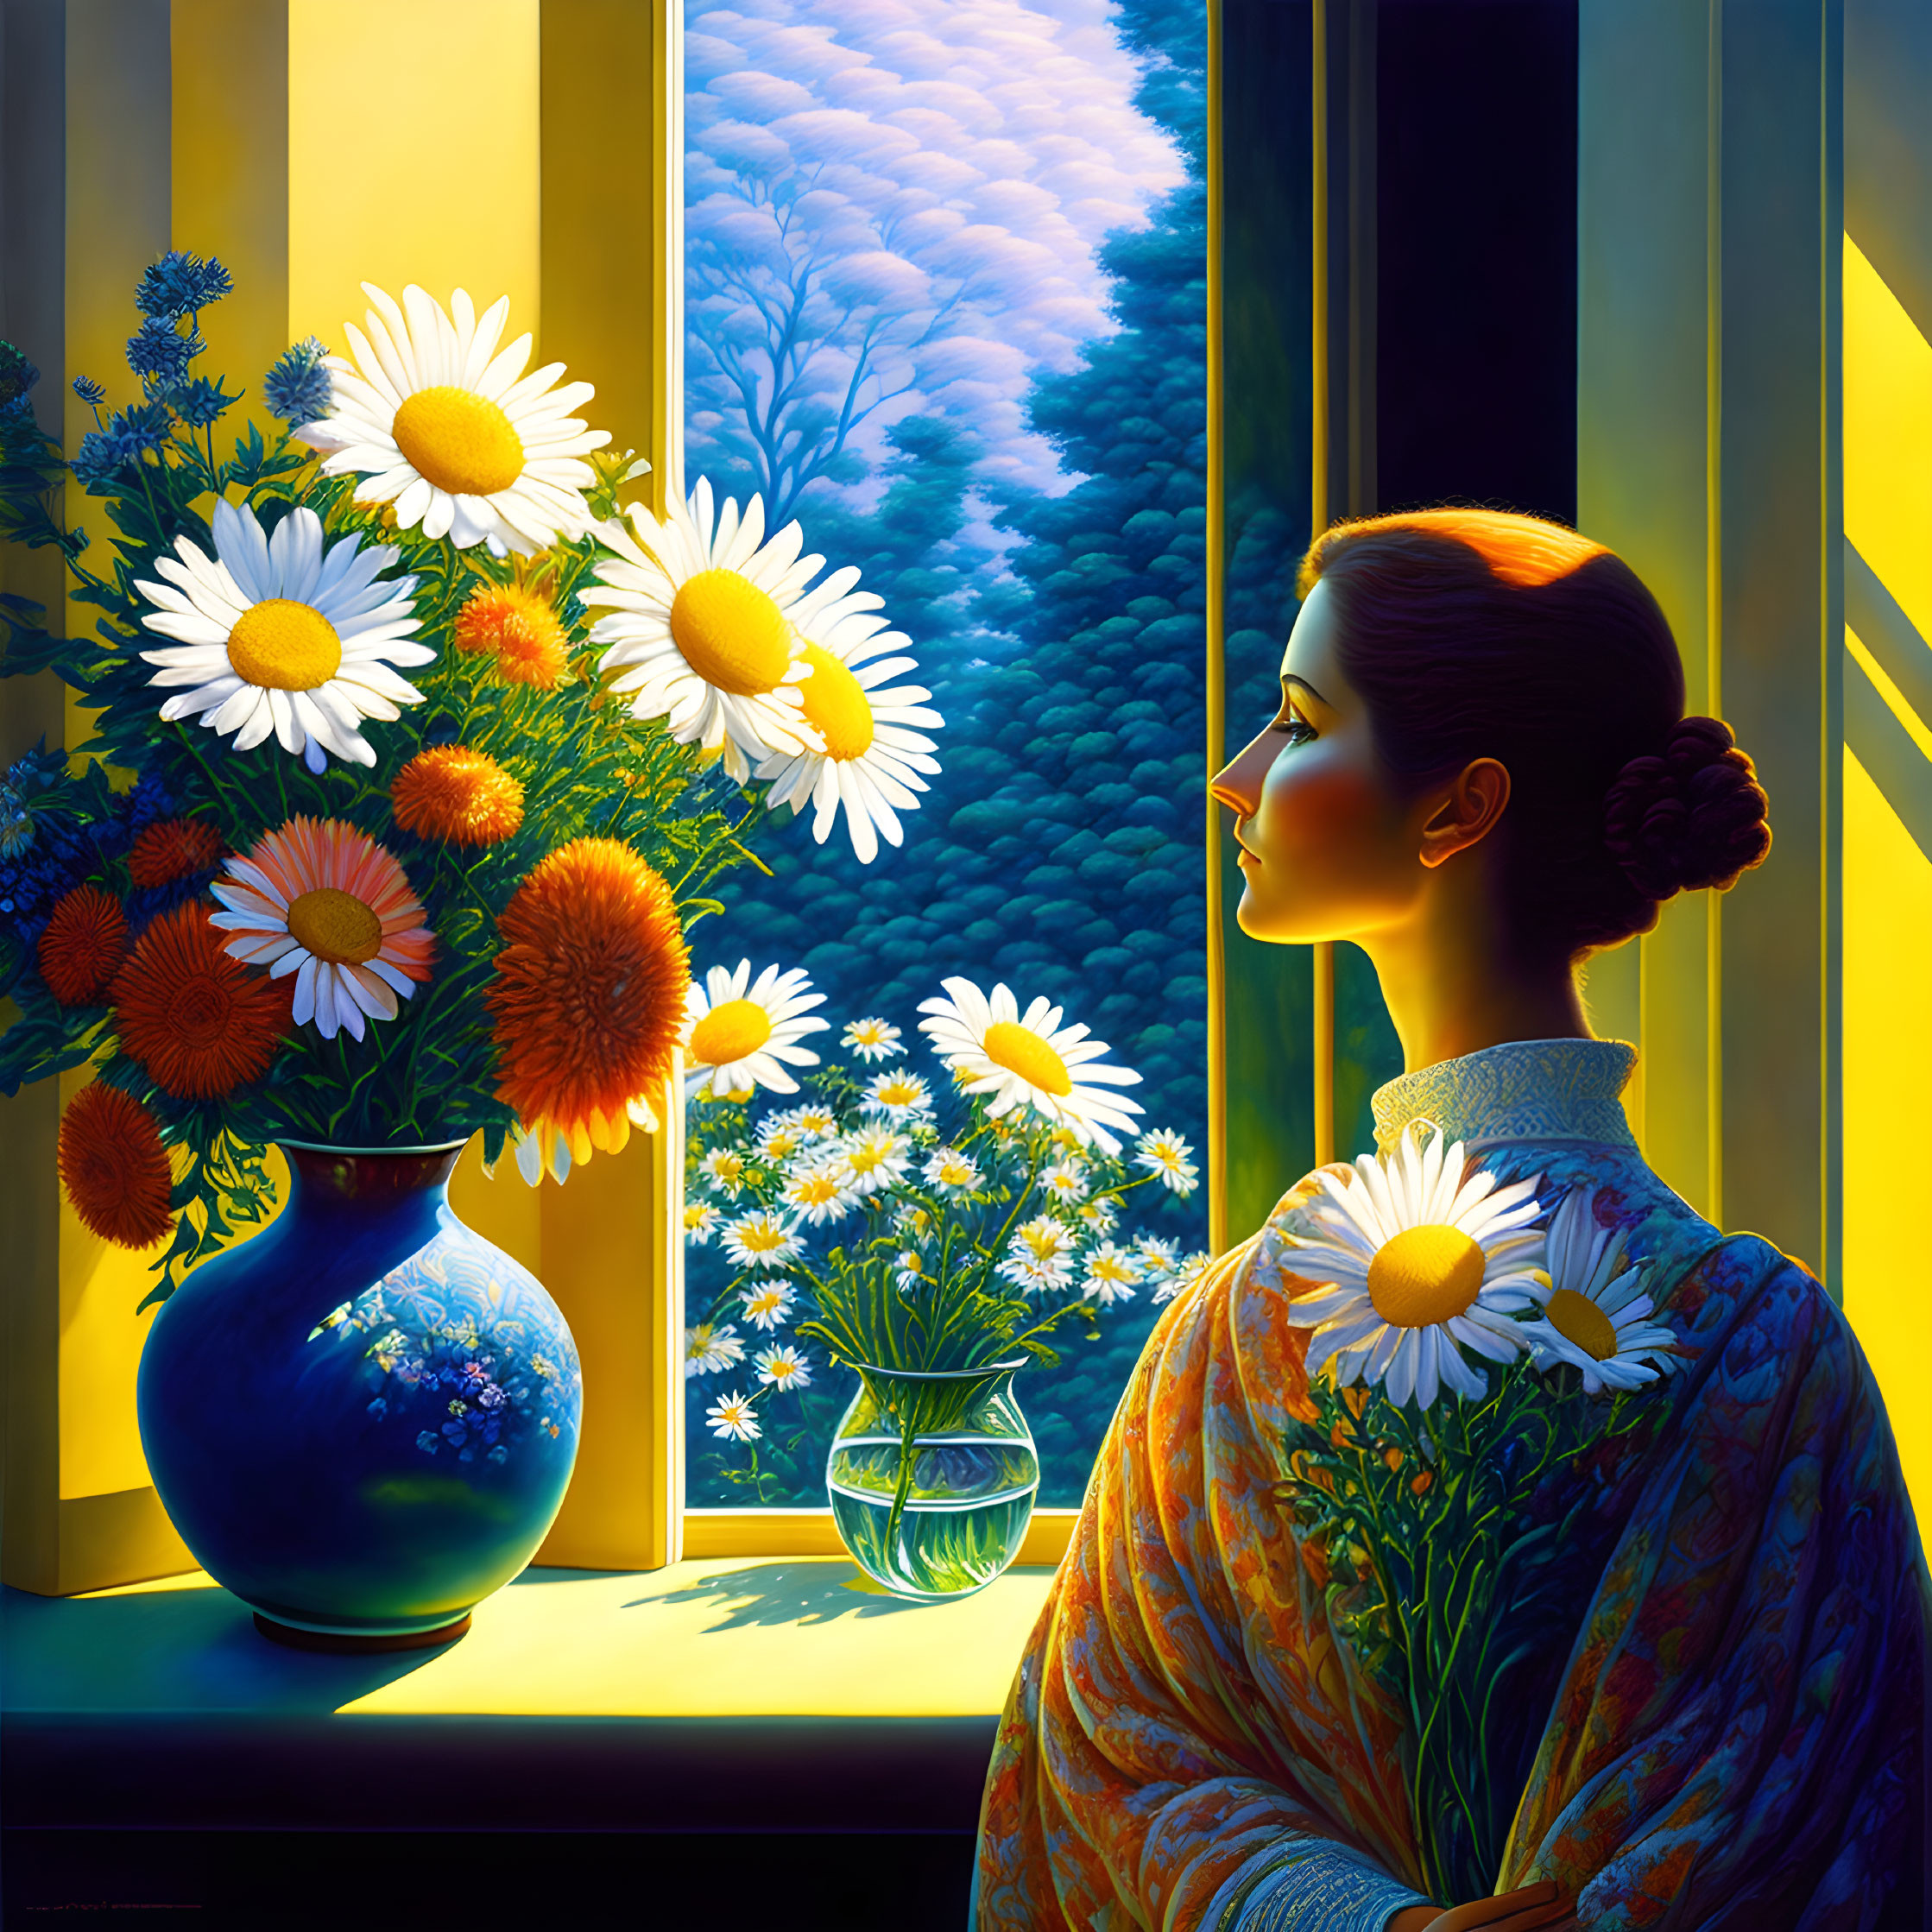 Contemplating flowers in a vase